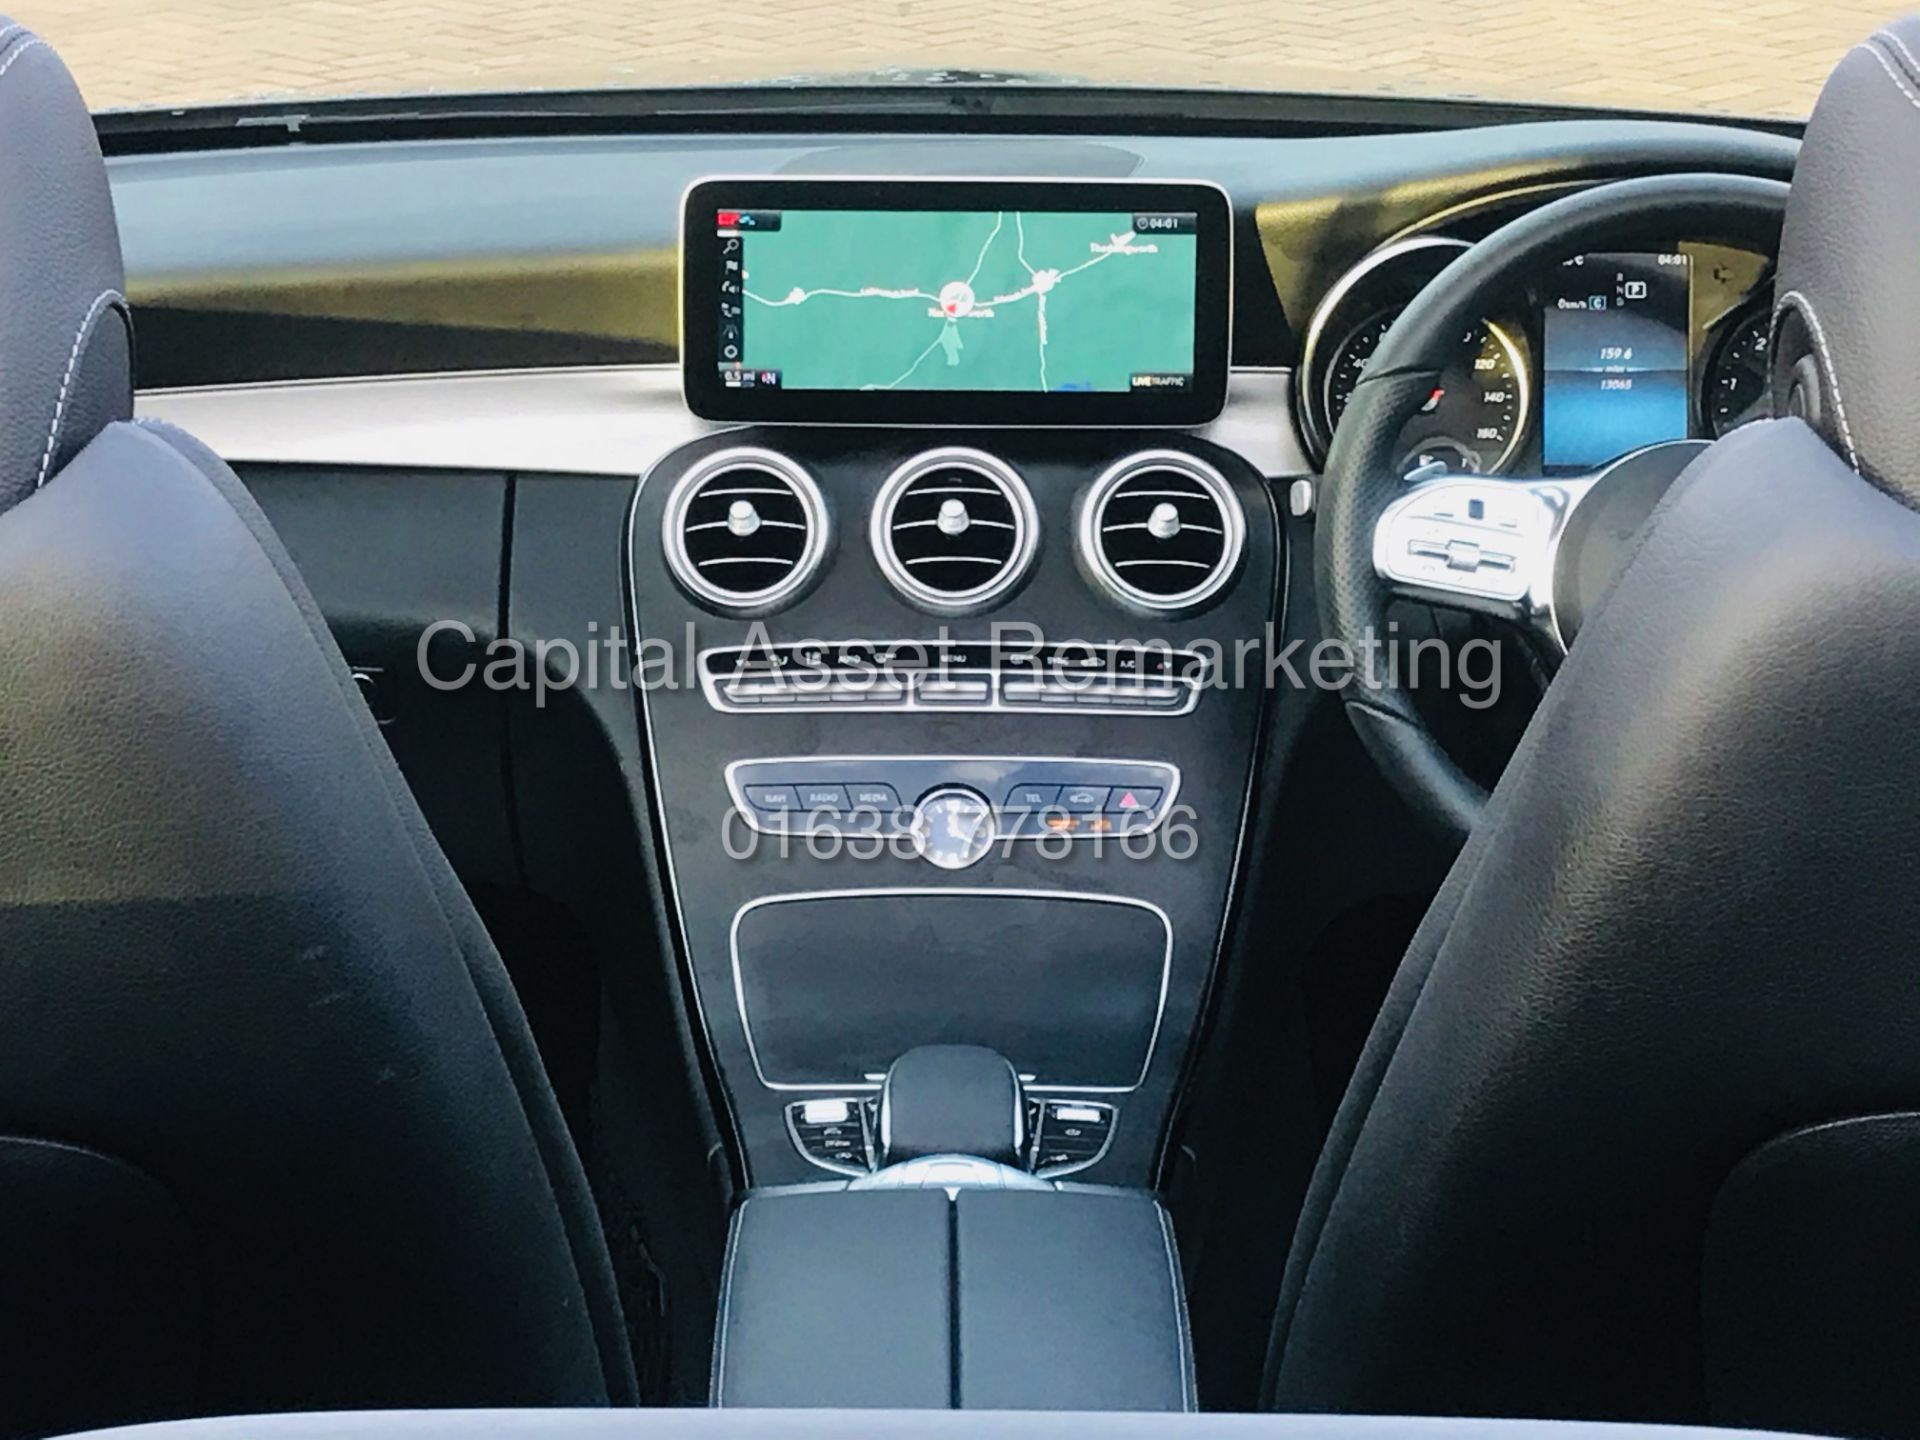 On Sale MERCEDES-BENZ C220d *AMG LINE -CABRIOLET* (2019) '9G TRONIC AUTO - LEATHER - SAT NAV' - Image 21 of 32